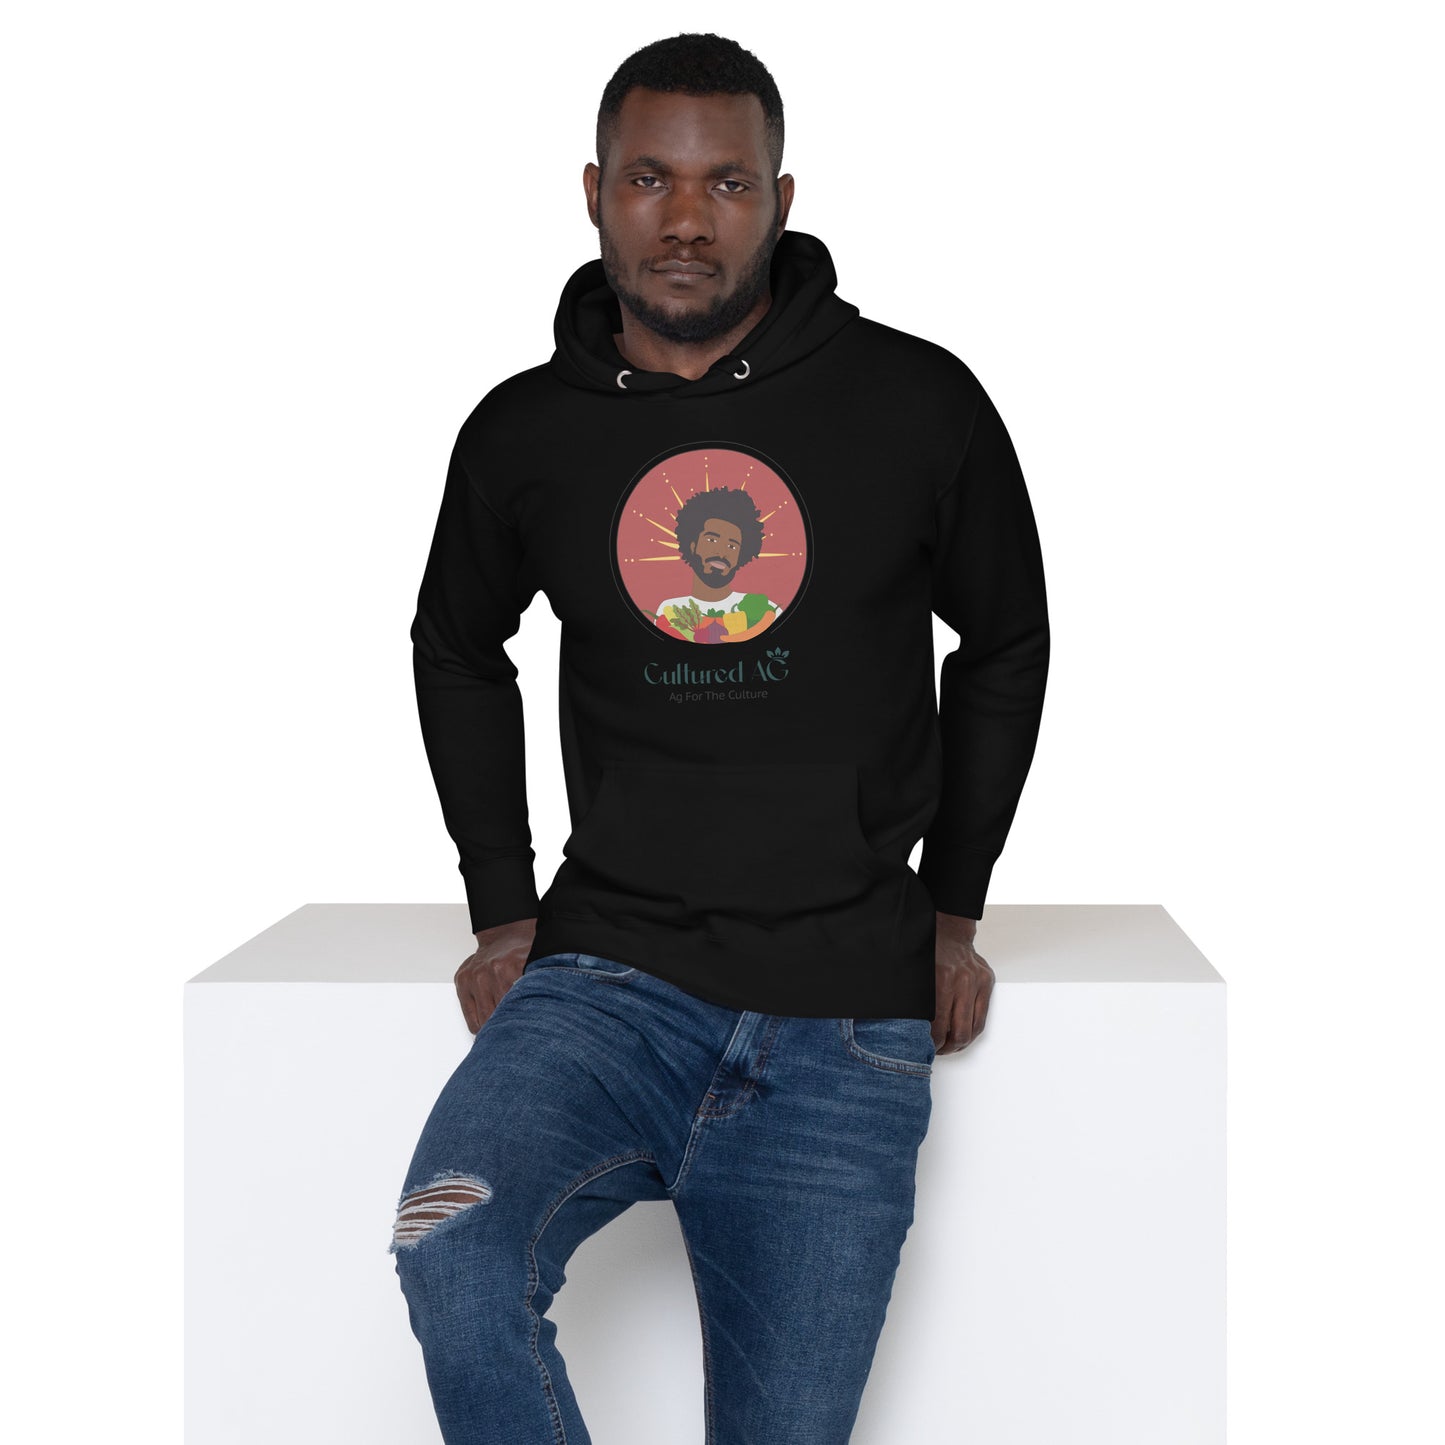 Ag for the Culture Unisex Hoodie - Dareon